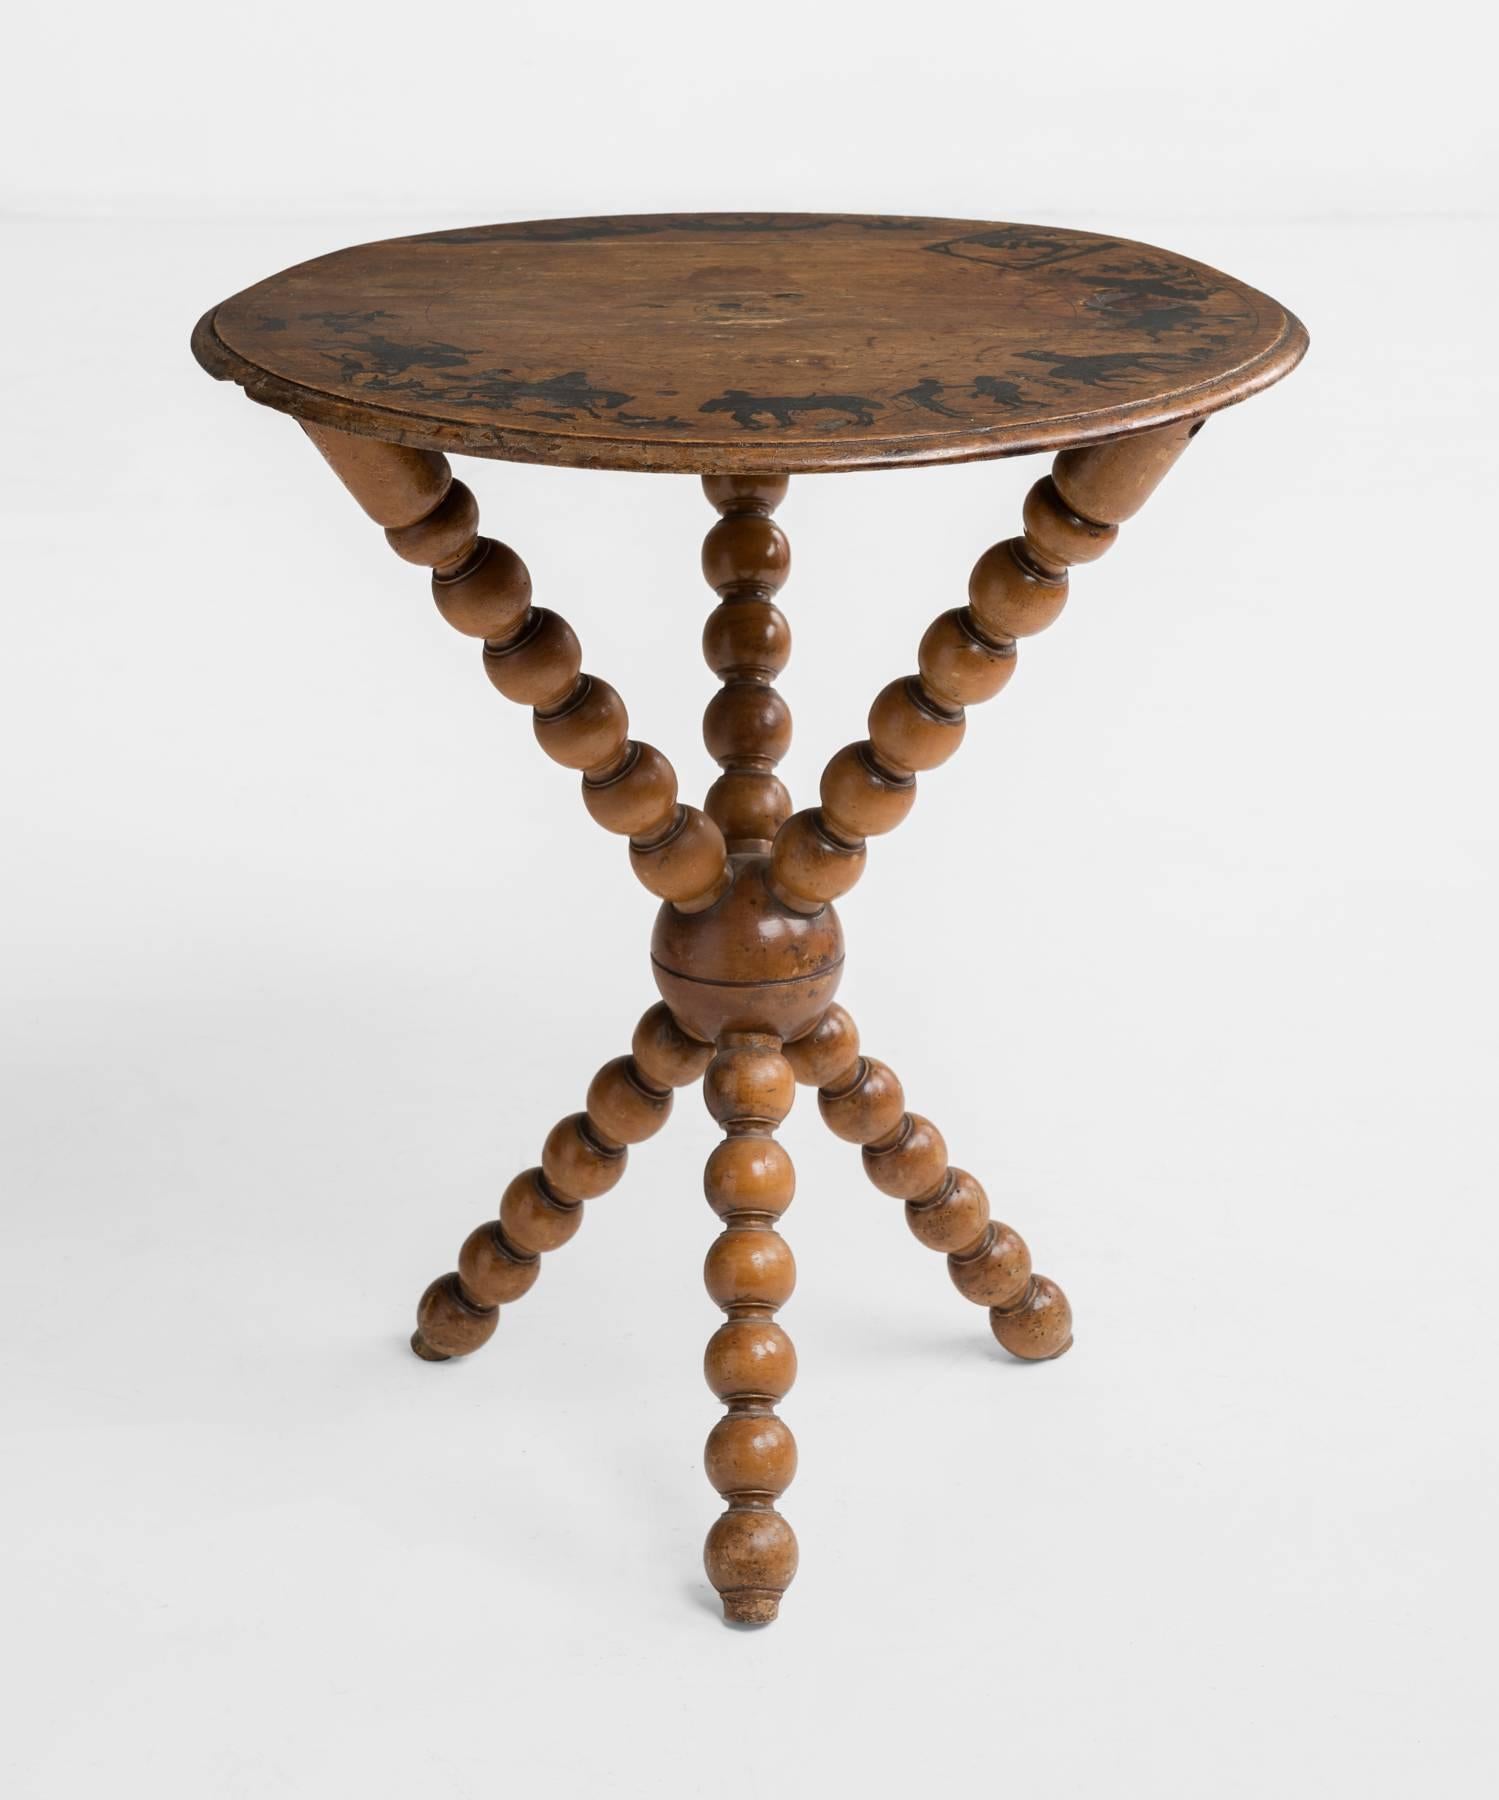 Fortune tellers table, circa 1830.

Gypsy fortune tellers table, with incredible ink drawings and symbols on mahogany surface and unique bobbin base.
 